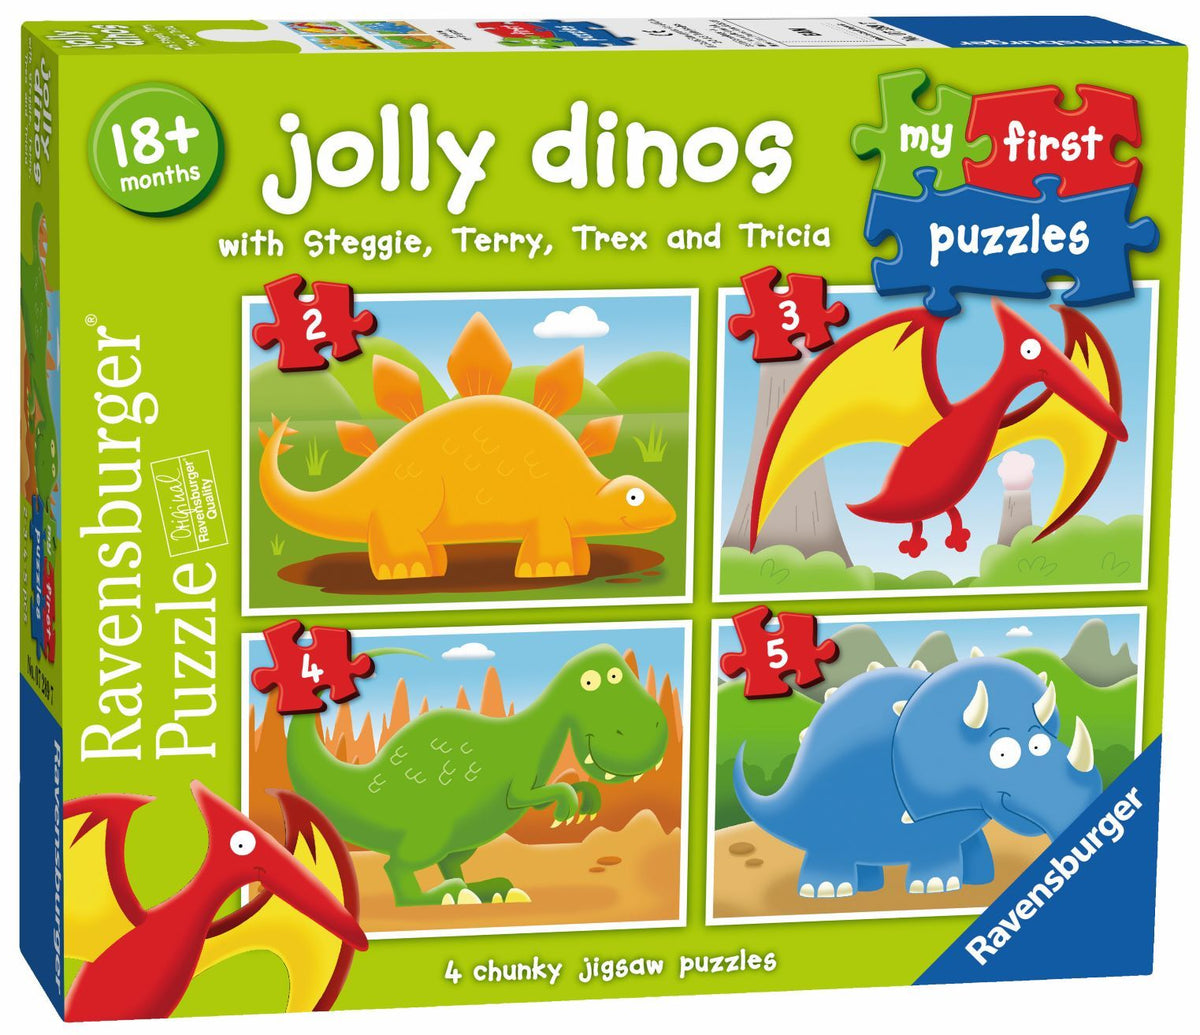 Jolly Dinos My First Puzzle 2, 3, 4 &amp; 5pc (Ravensburger Puzzle)